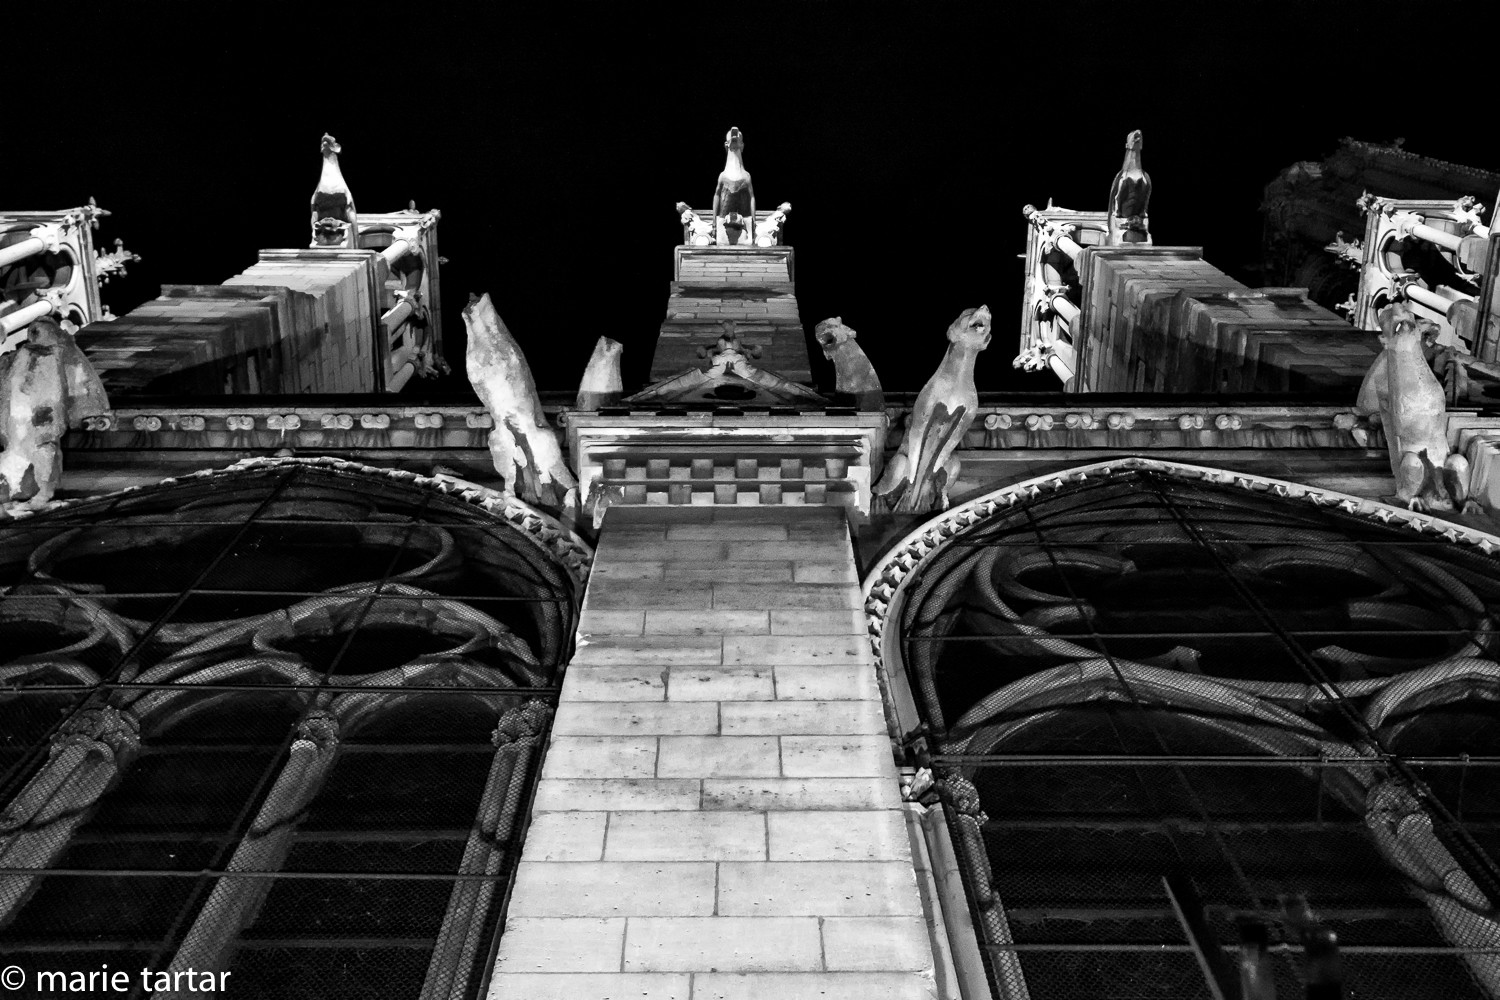 Notre Dame is well lit at night; walking home from dinner one night inspired me to return the next night, armed with a longer focal length lens